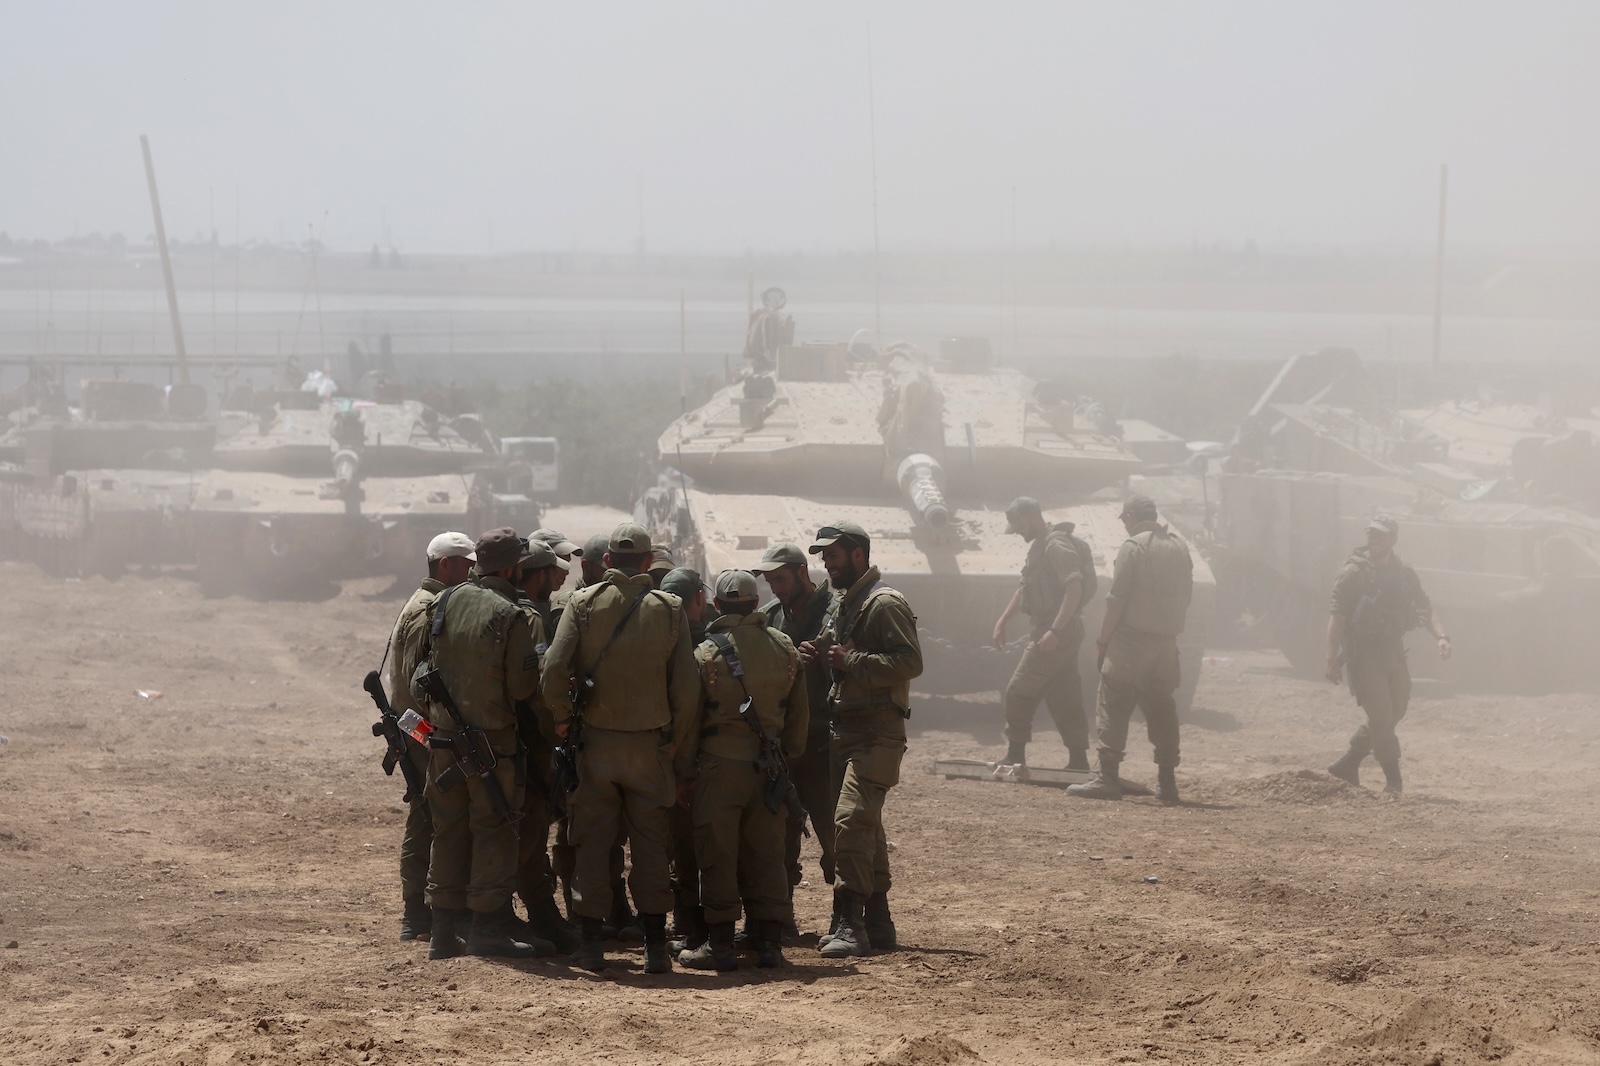 epa11328513 Israeli soldiers with military vehicles gather at an undisclosed position near the border fence with the Gaza Strip, in southern Israel, 09 May 2024. US Defense Secretary Austin at a Senate Appropriations Committee meeting on 08 May confirmed the Biden administration's decision to pause a shipment of 'high payload munitions' to Israel amid concerns over an Israeli major offensive in the southern Gaza city of Rafah. The Israeli military on 06 May called on residents of eastern Rafah to 'temporarily' evacuate to an expanded humanitarian area. On 07 May, Israel said that its troops began an operation targeting Hamas militants and infrastructure within specific areas of eastern Rafah, taking operational control of the Gazan side of the Rafah crossing. More than 34,800 Palestinians and over 1,455 Israelis have been killed, according to the Palestinian Health Ministry and the Israel Defense Forces (IDF), since Hamas militants launched an attack against Israel from the Gaza Strip on 07 October 2023, and the Israeli operations in Gaza and the West Bank which followed it.  EPA/ABIR SULTAN